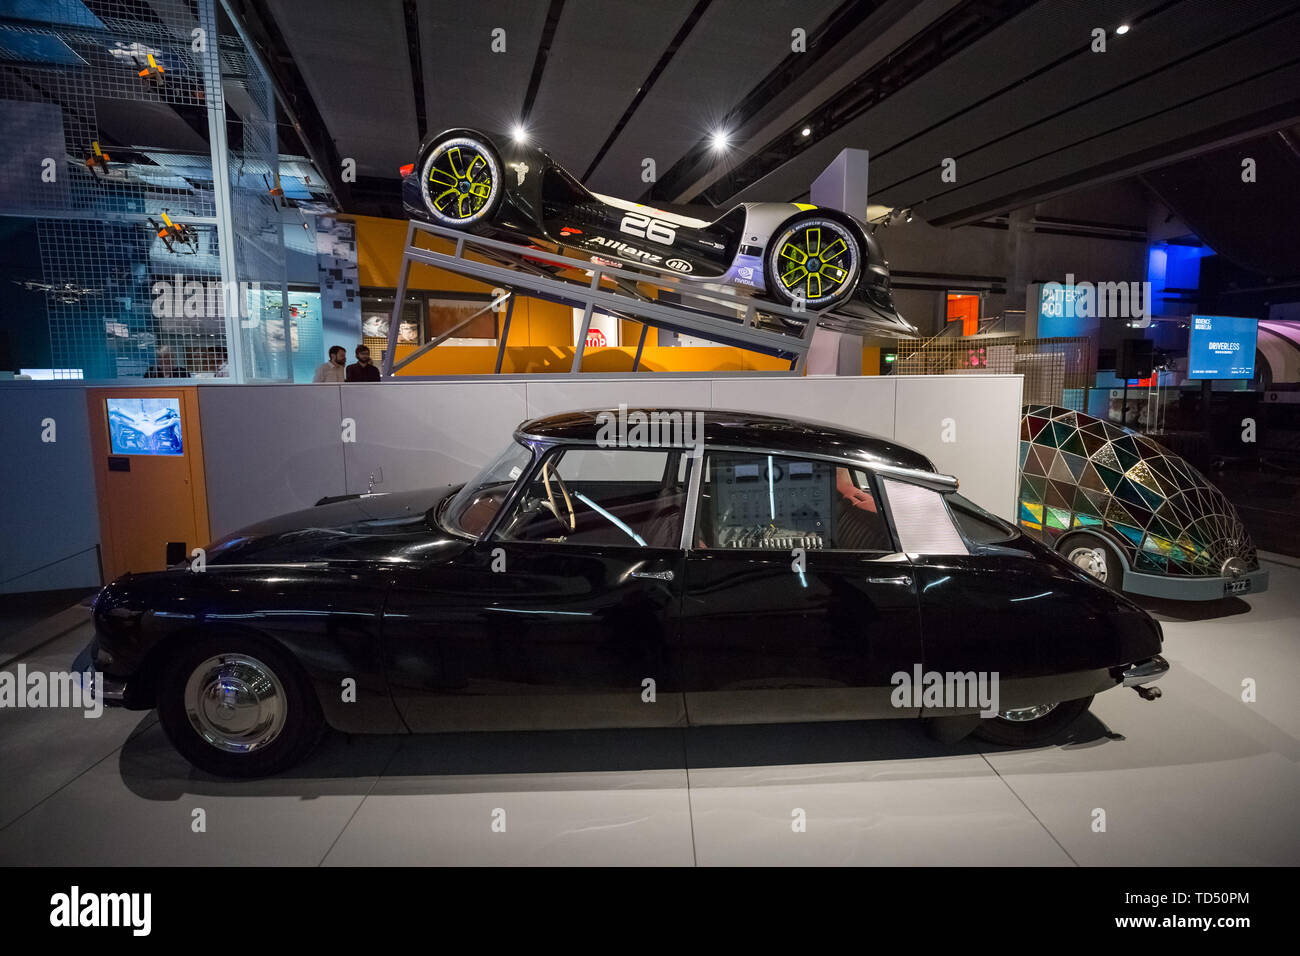 London, UK. 12th June 2019. Driverless technology 'Who is in control?' exhibition is launched the Science Museum. Pictured(bottom): Citroen DS19, 1960, an early prototype example of British self-driving technology. Pictured (top): 'Robocar' the world's first self-driving rally car, fully electric and developed by Roborace. Exploring the history of self-driving vehicles, the exhibition also examines how much control we're willing to transfer to them and how their wider deployment could shape out habits, behaviour and society. Credit: Guy Corbishley/Alamy Live News Stock Photo